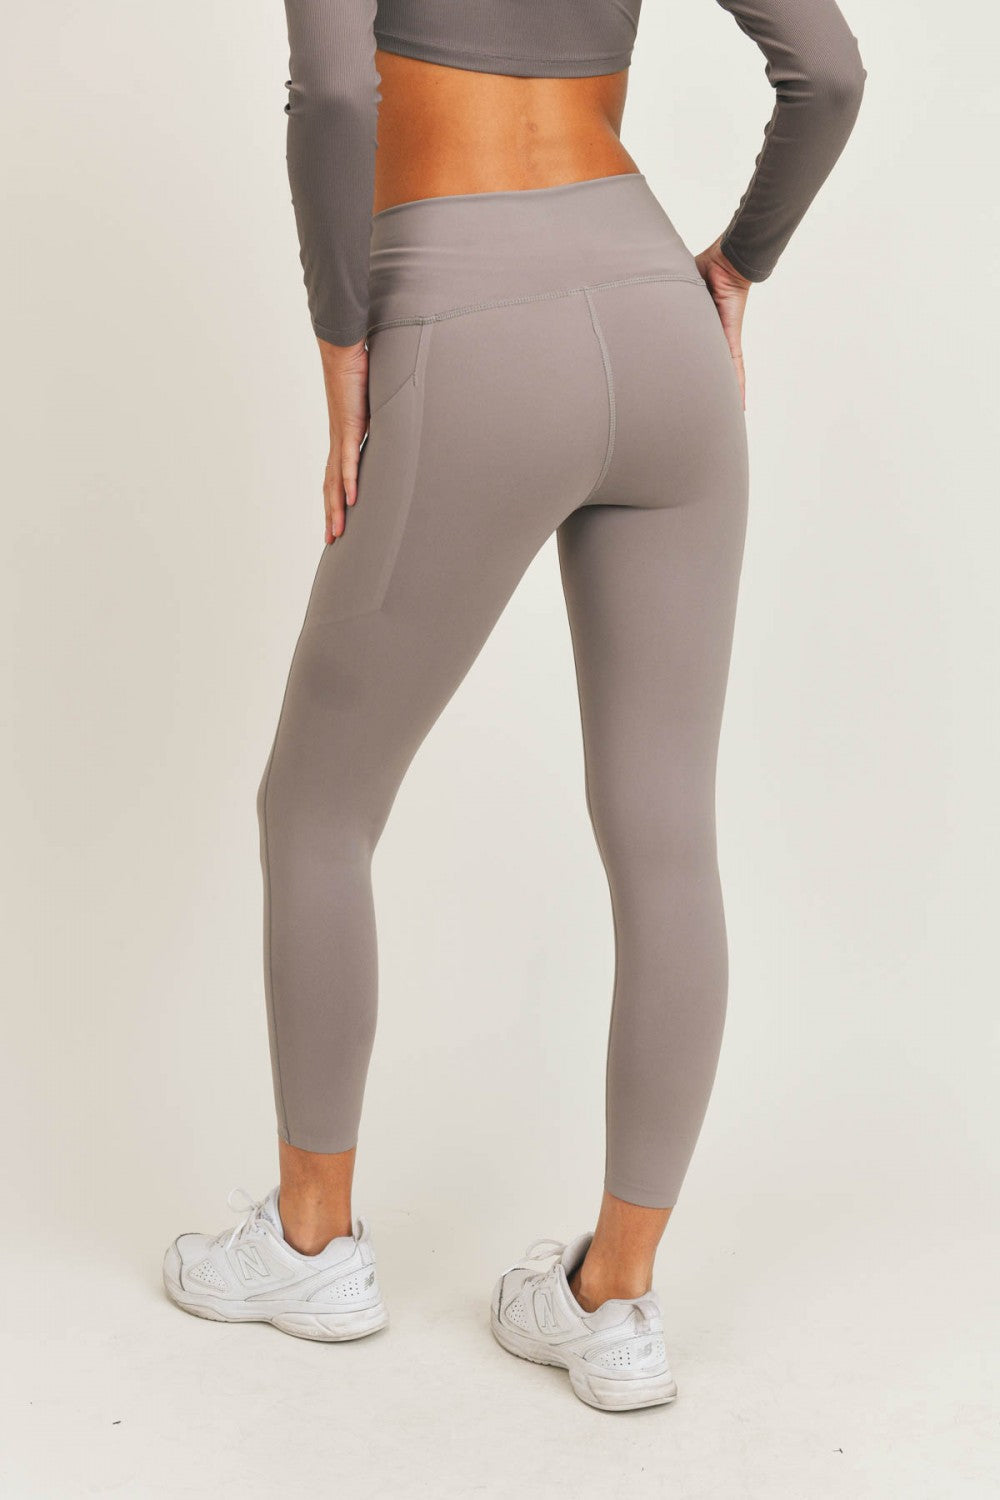 Harvard Seamless Leggings - High-waisted Compression By Maxxim Large :  Target